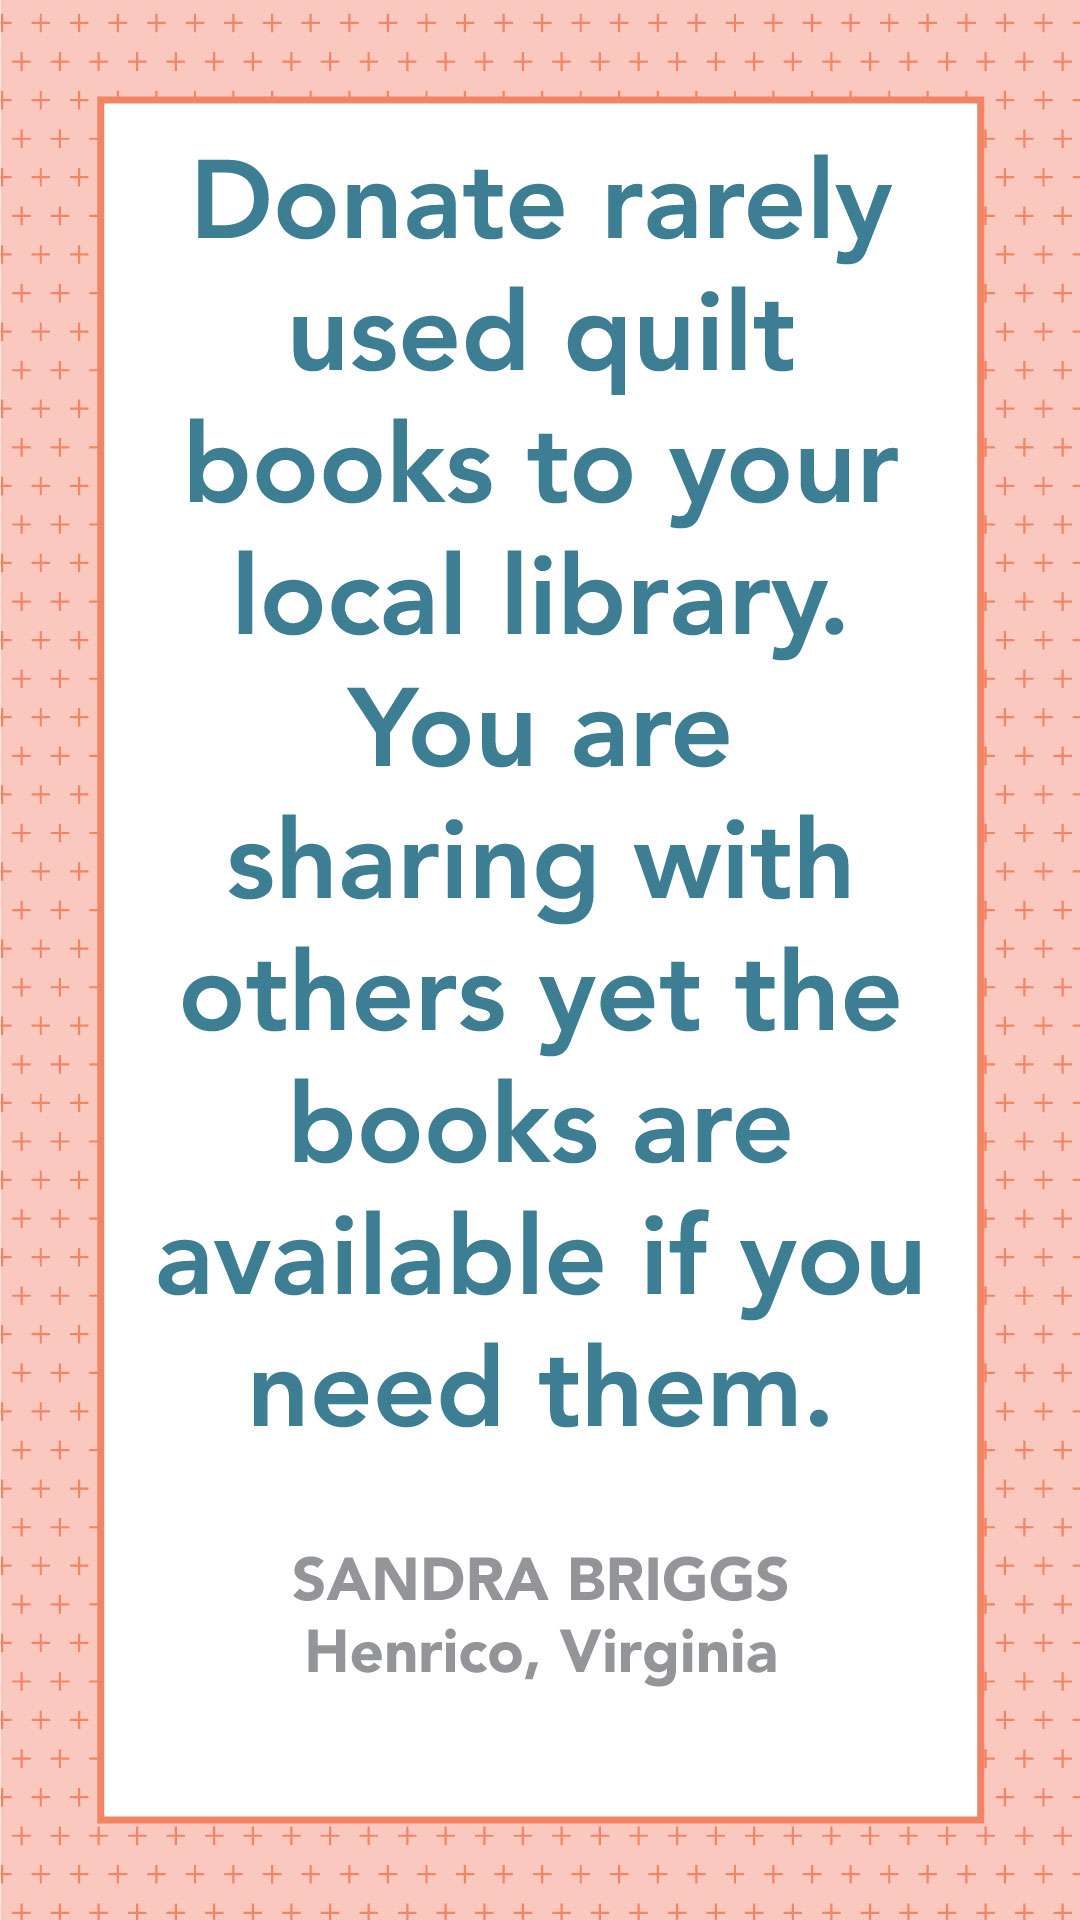 Lend to a Library